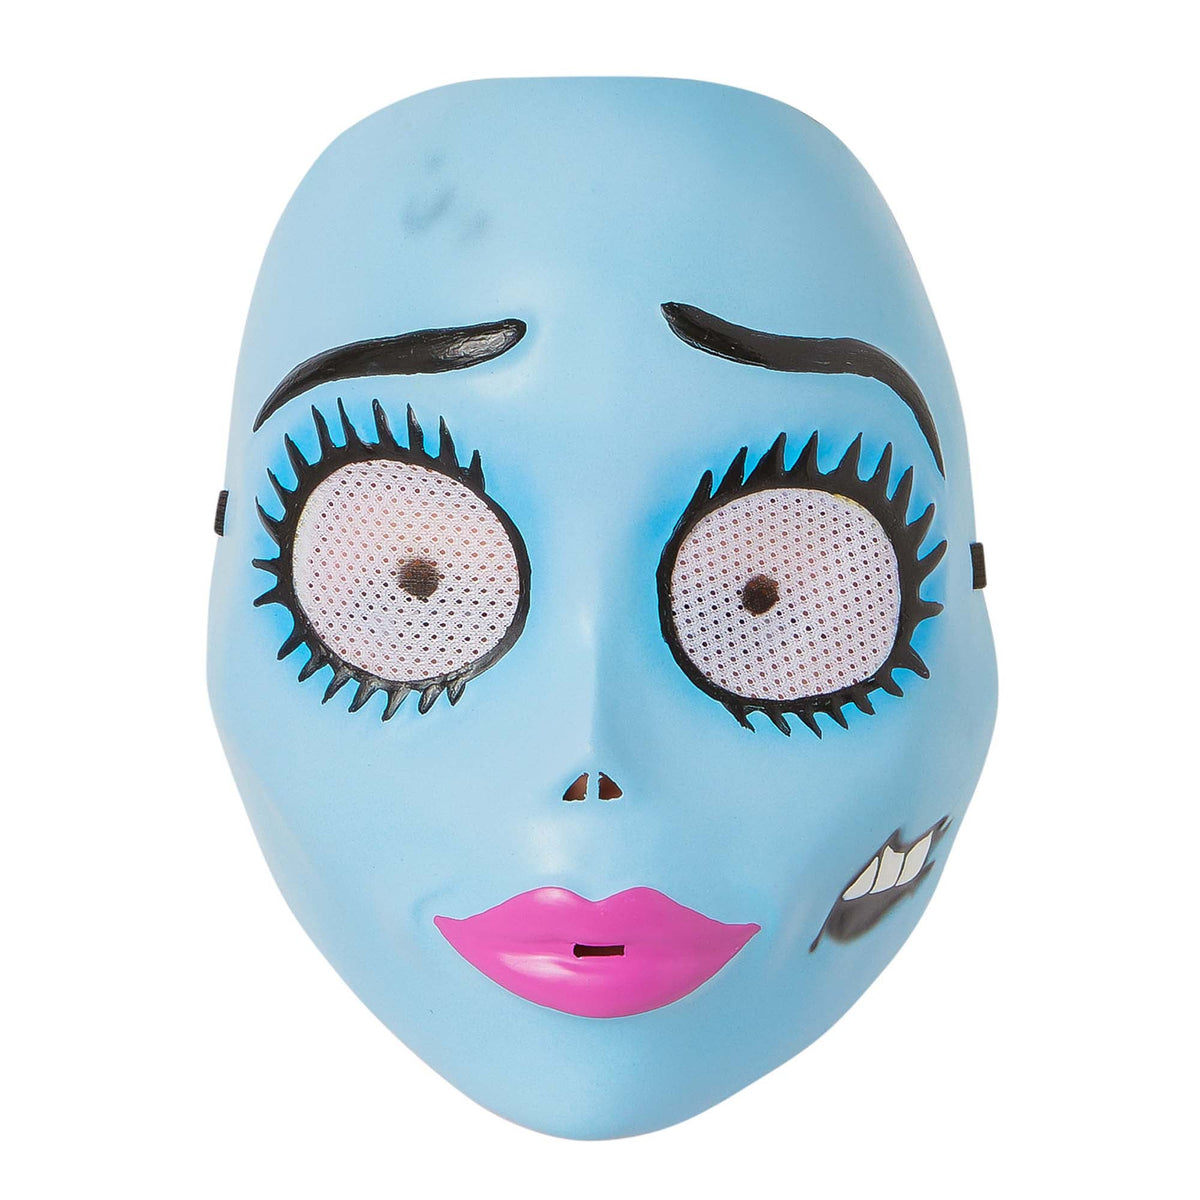 RUBIES II (Ruby Slipper Sales) Costumes Emily the Corpse Bride Mask for Adults